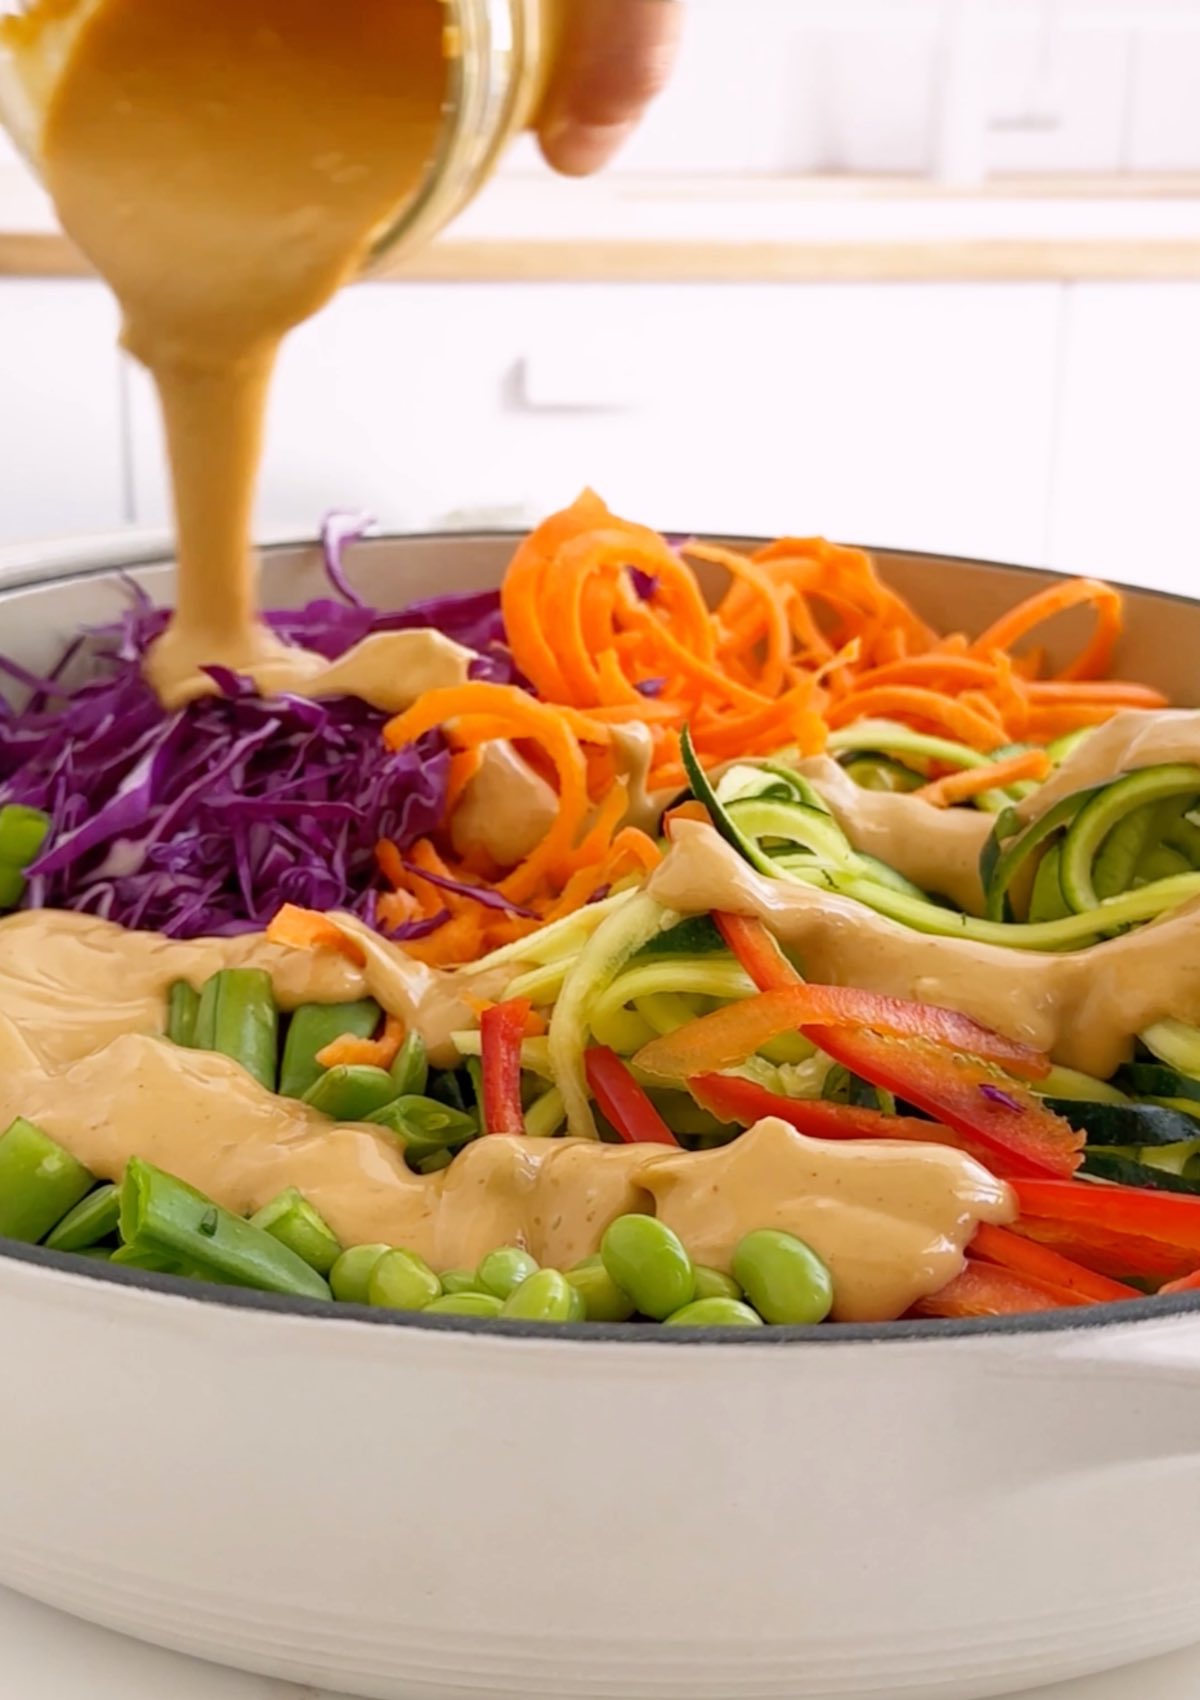 Pouring peanut dressing over bed of zucchini noodles, carrot noodles, and other vegetables. 